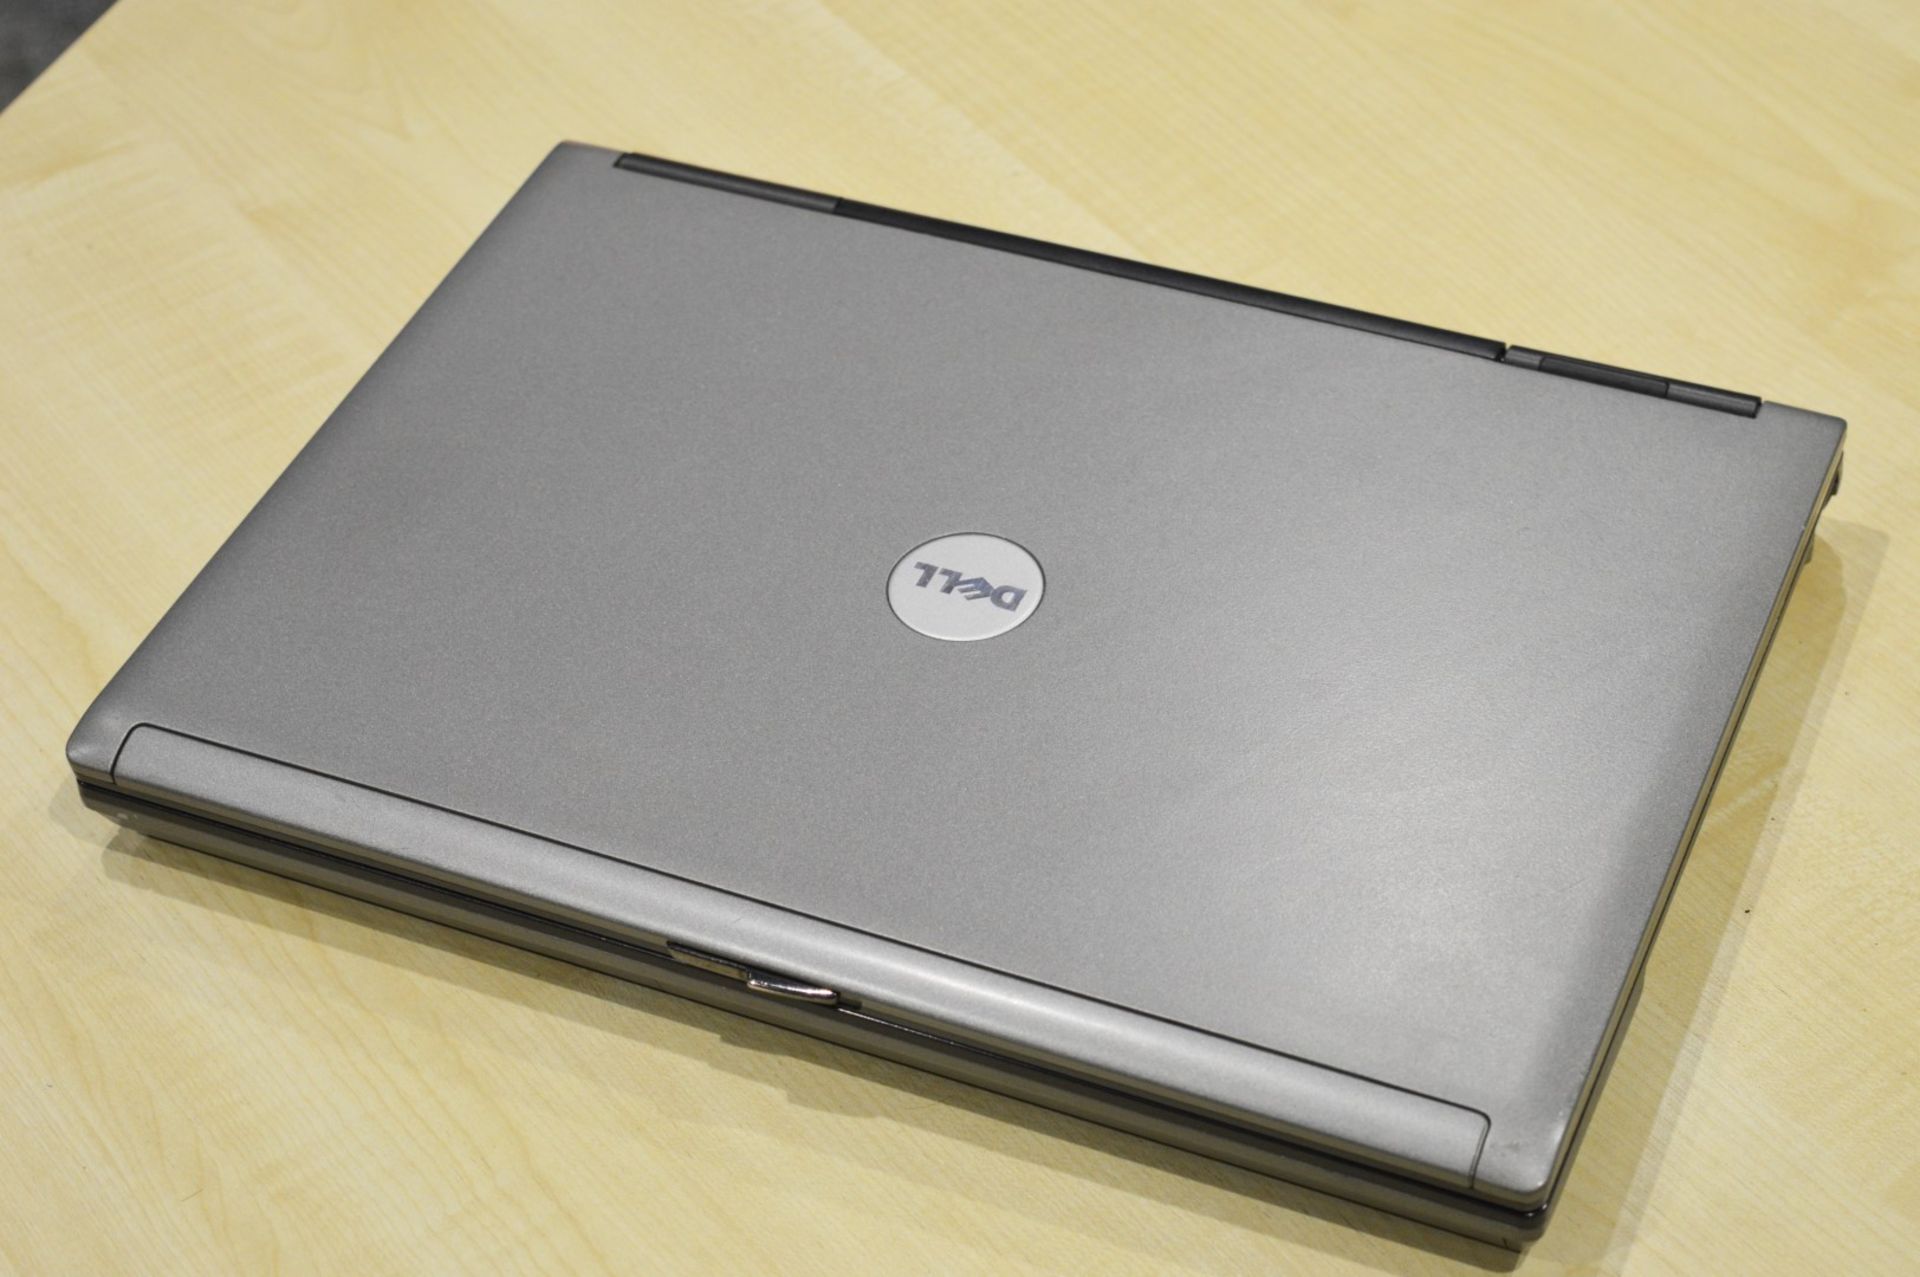 1 x Dell Latitude D630 14 Inch Laptop Computer - Intel Core Duo 2.2ghz Processor and 2gb Ram - - Image 3 of 3